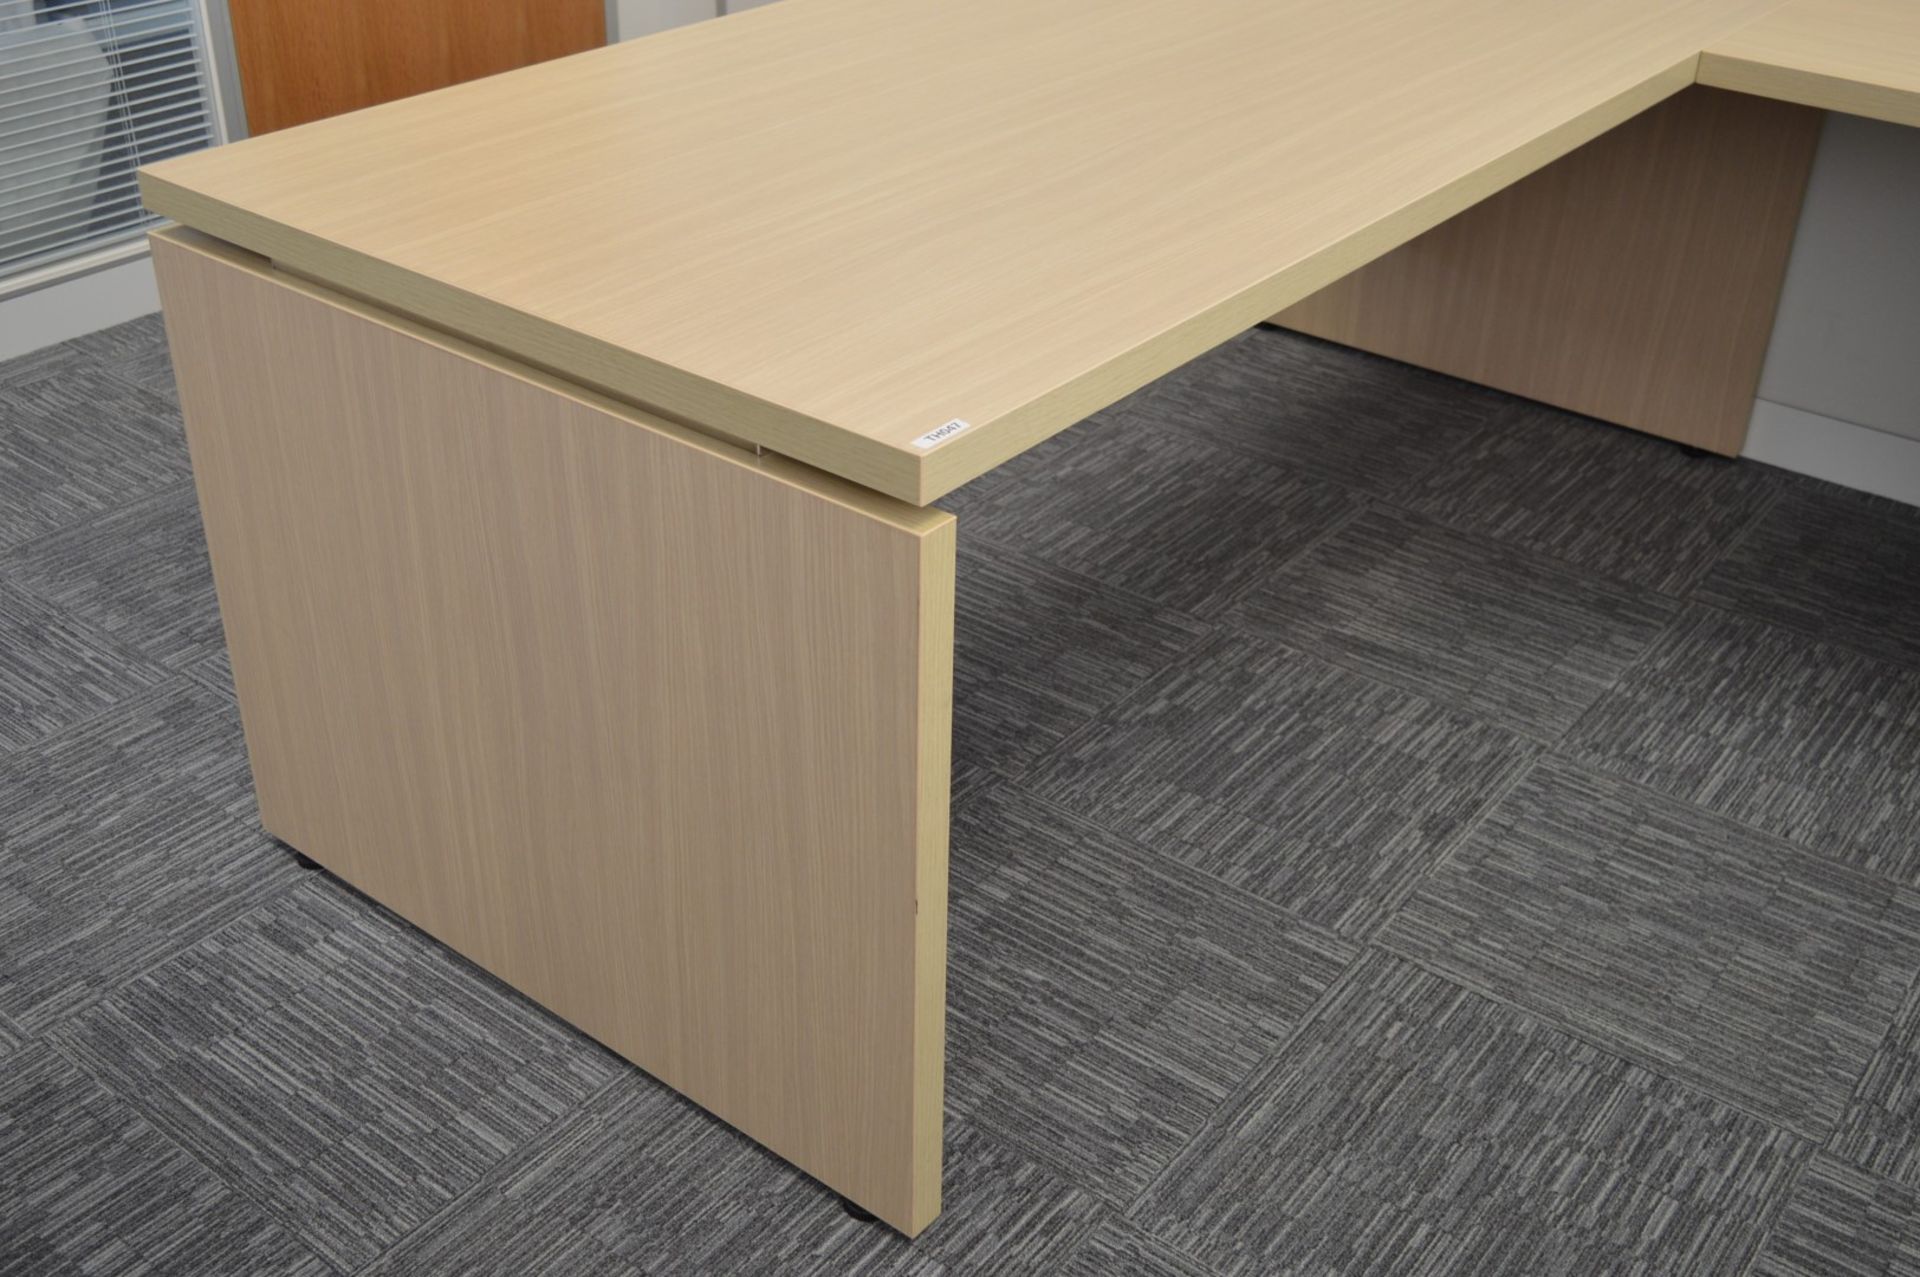 1 x Babini Executives Office Desk With Three Drawer Pedestal and Side Table - Attractive Finish With - Image 5 of 9